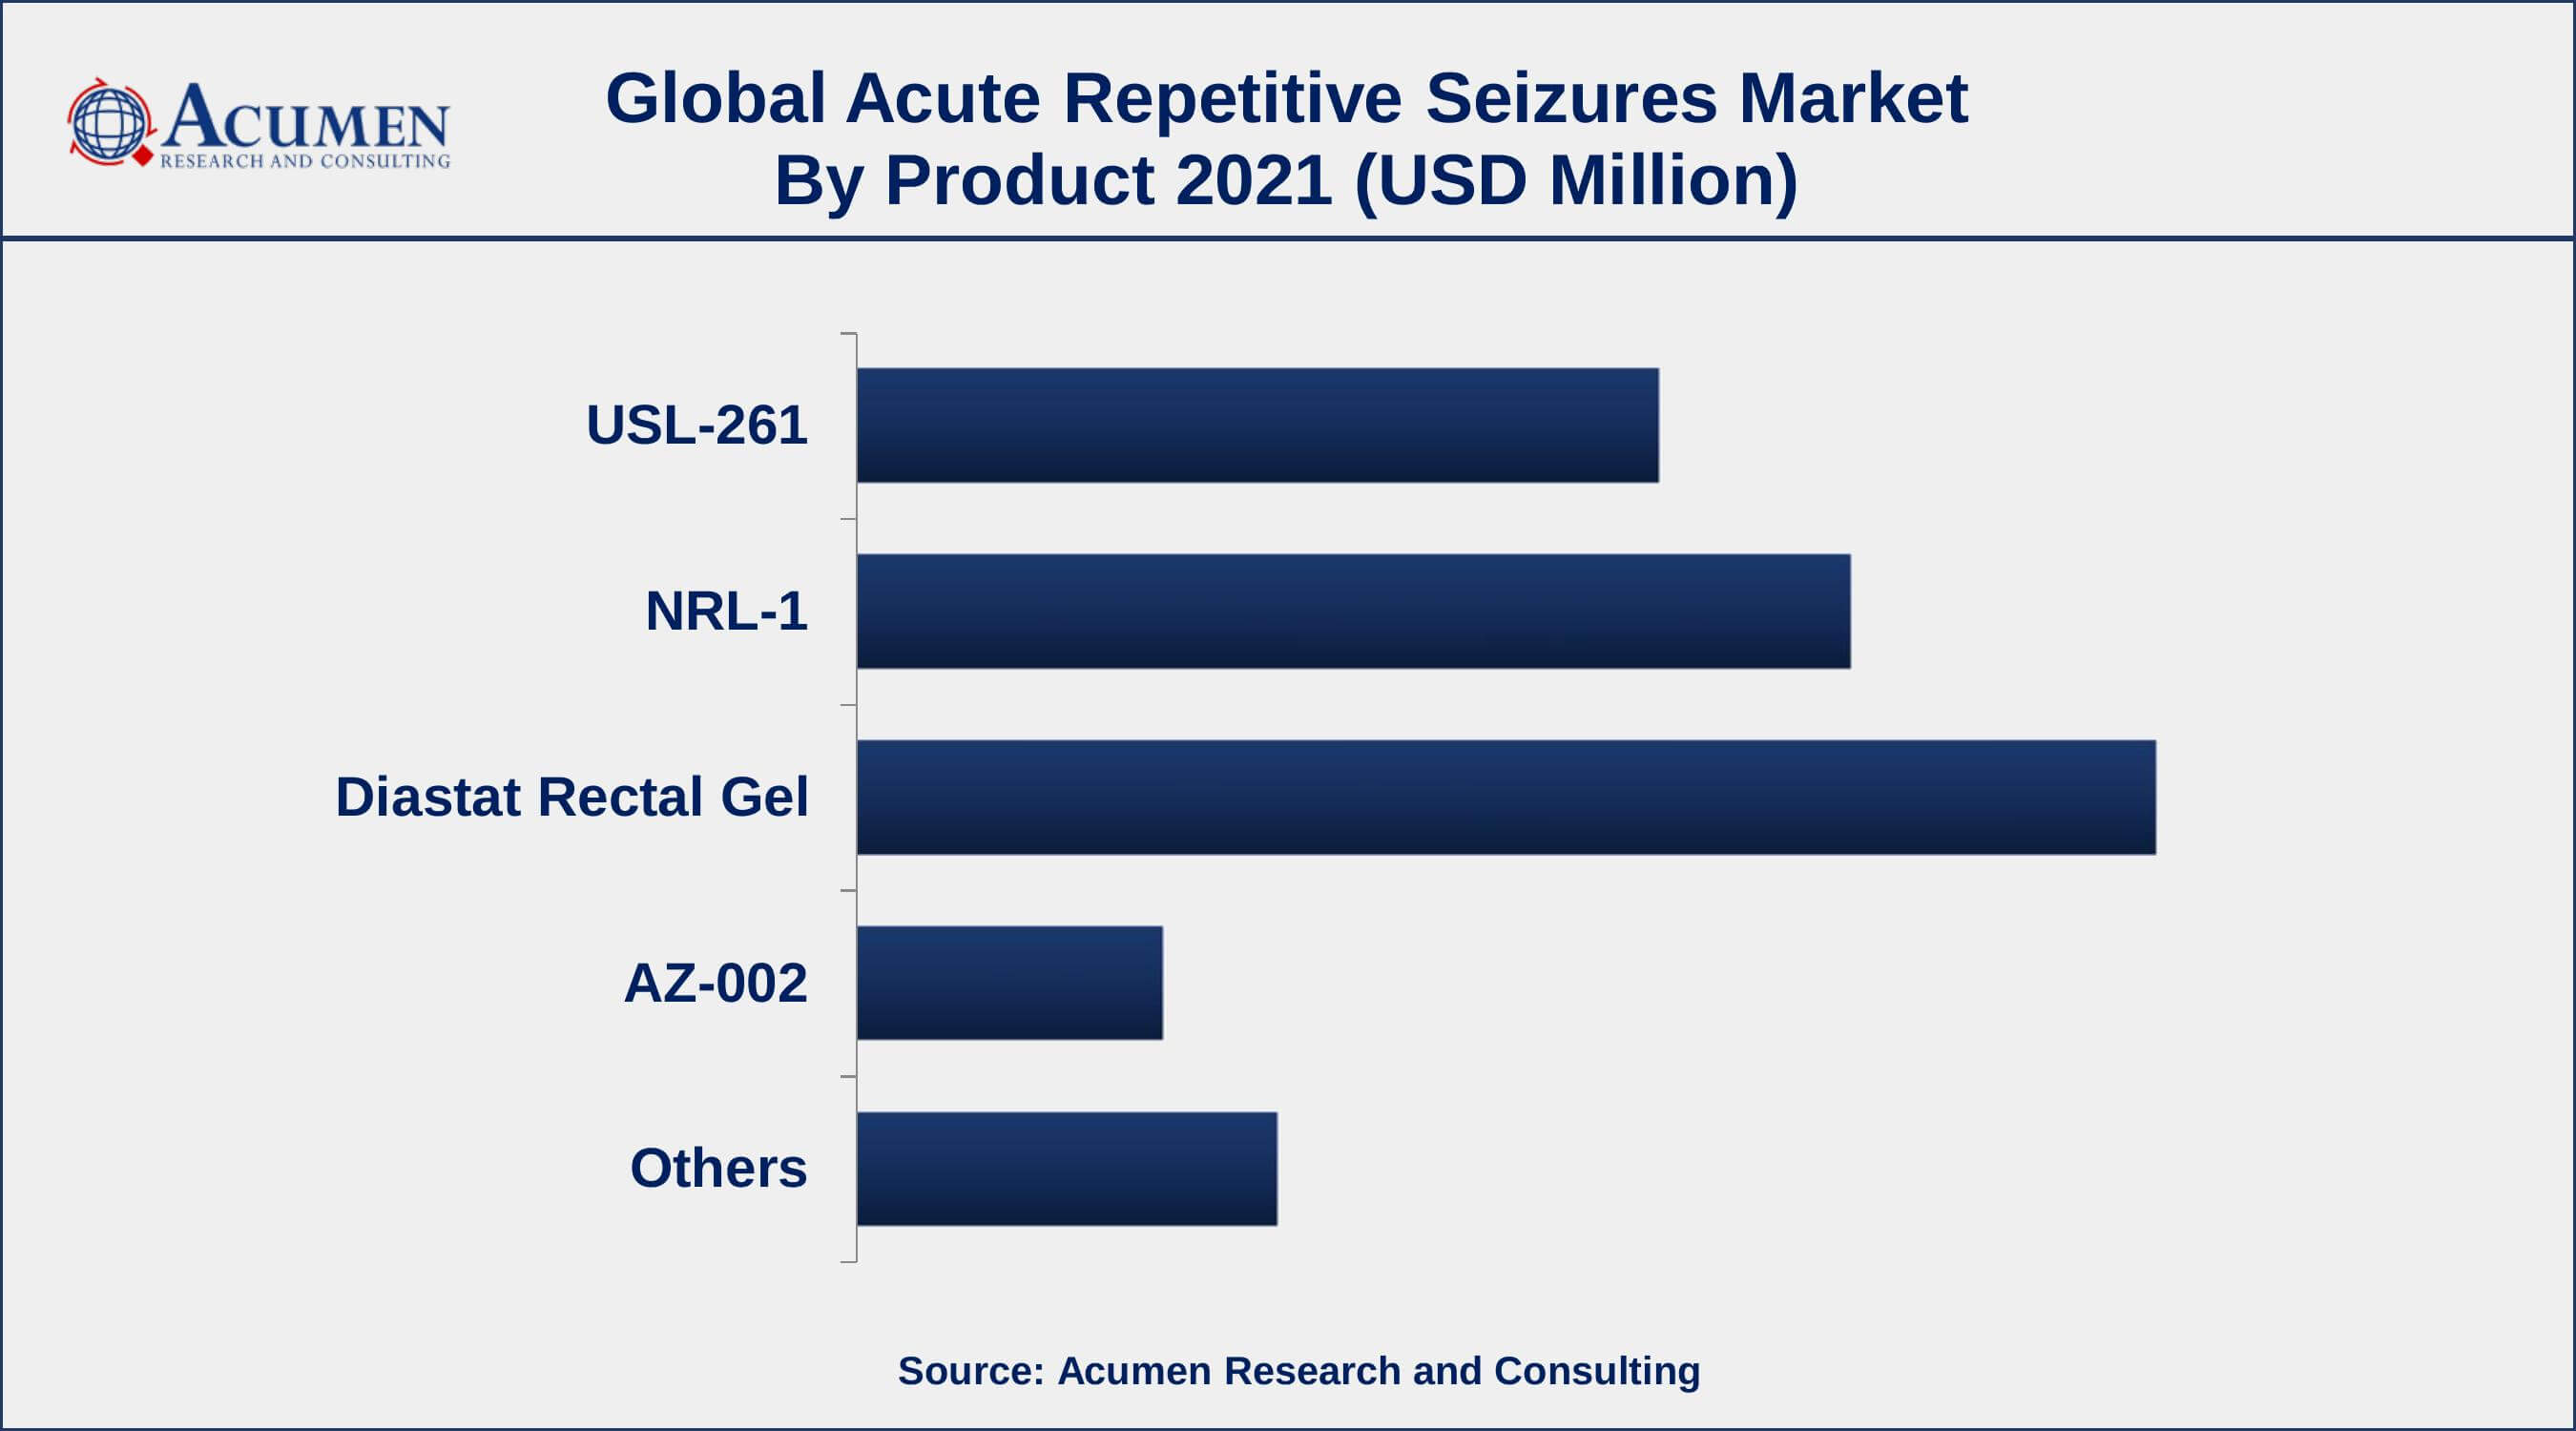 Based on product, diastat rectal gel segment accounted for over 34% of the overall market share in 2021